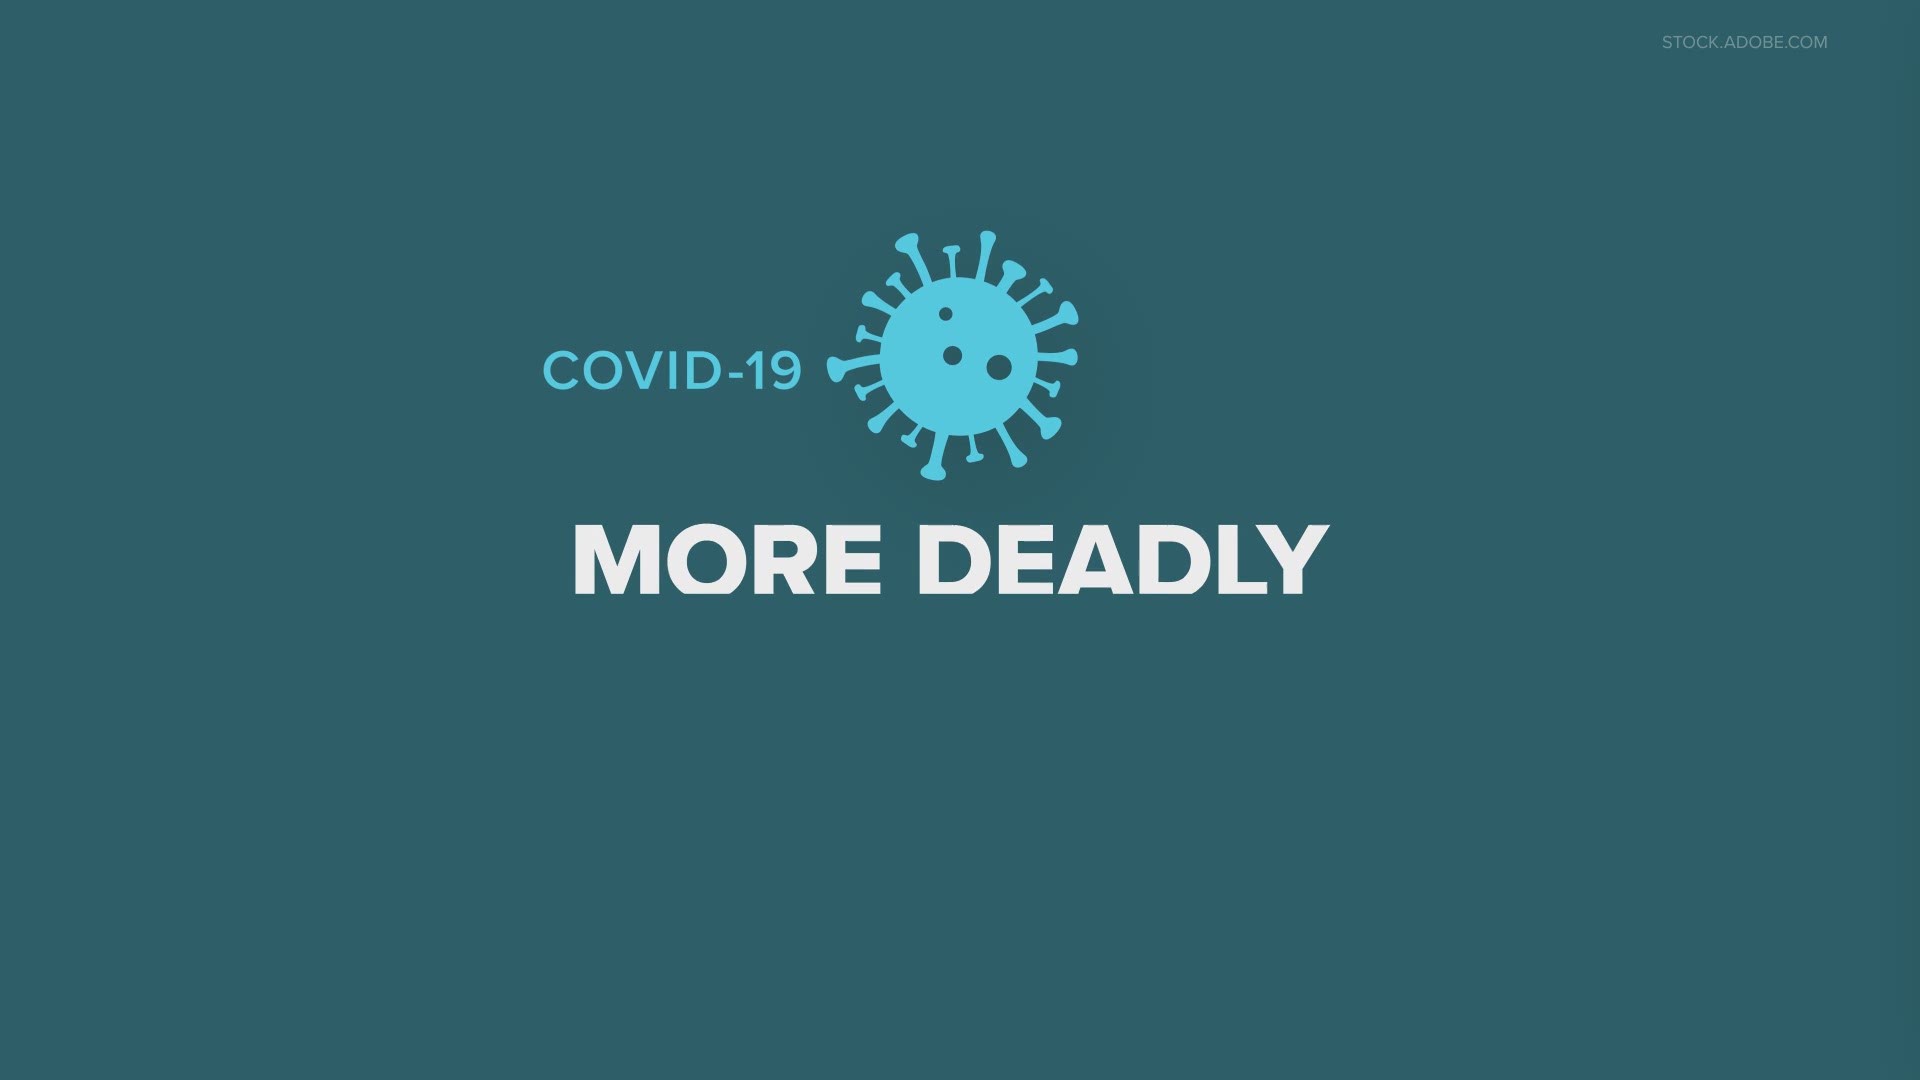 How does the COVID-19 pandemic in the U.S. stack up to the 1918 flu, 9/11, World War II and other historic events? Here are the numbers.